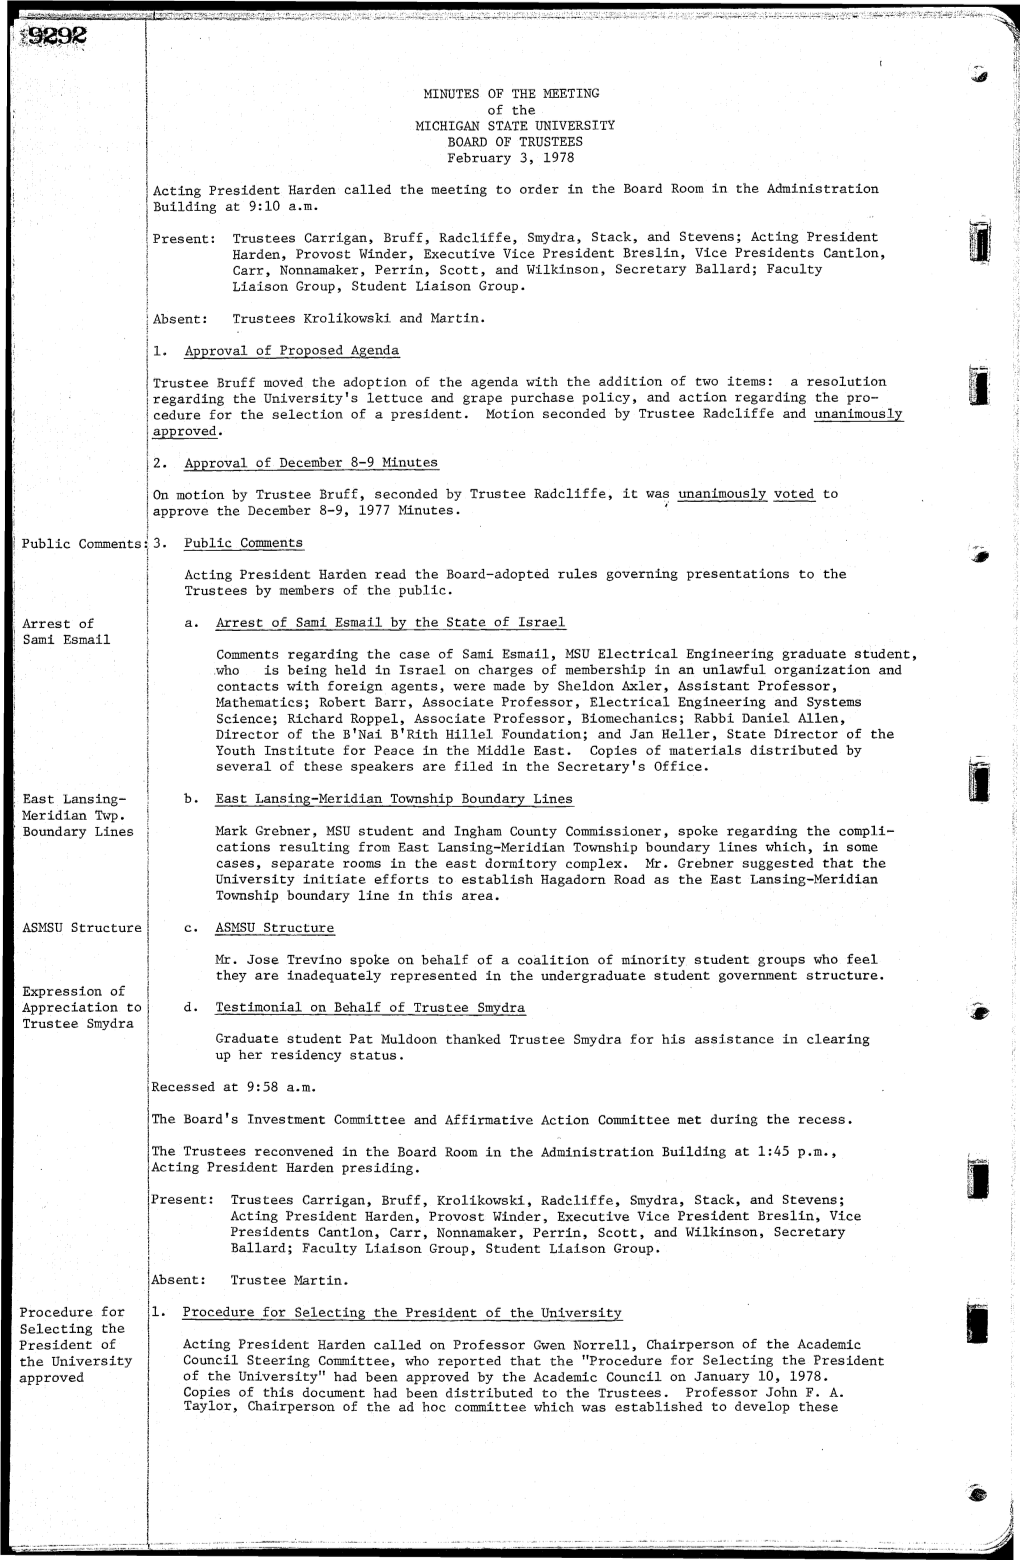 MINUTES of the MEETING of the MICHIGAN STATE UNIVERSITY BOARD of TRUSTEES February 3, 1978